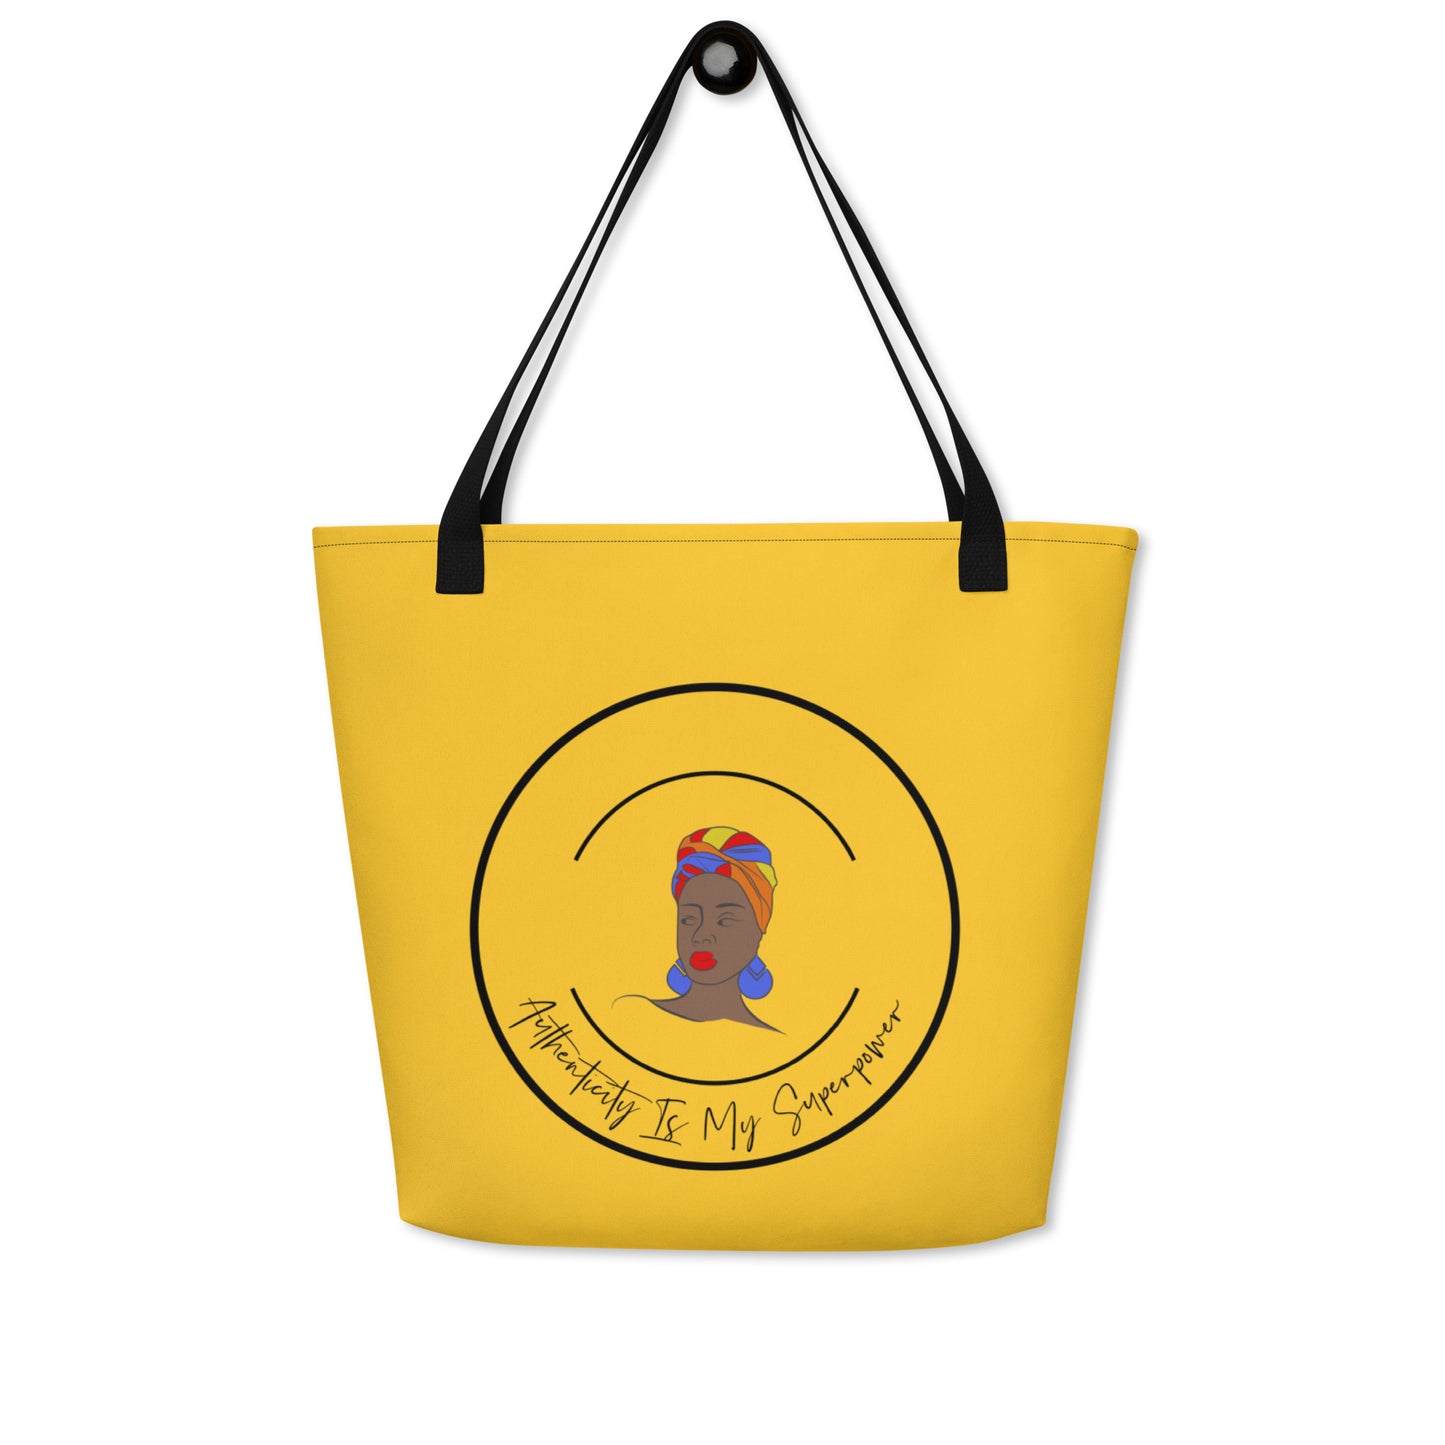 Authenticity is My Supwerpower Women's Empowerment Large Tote Bag